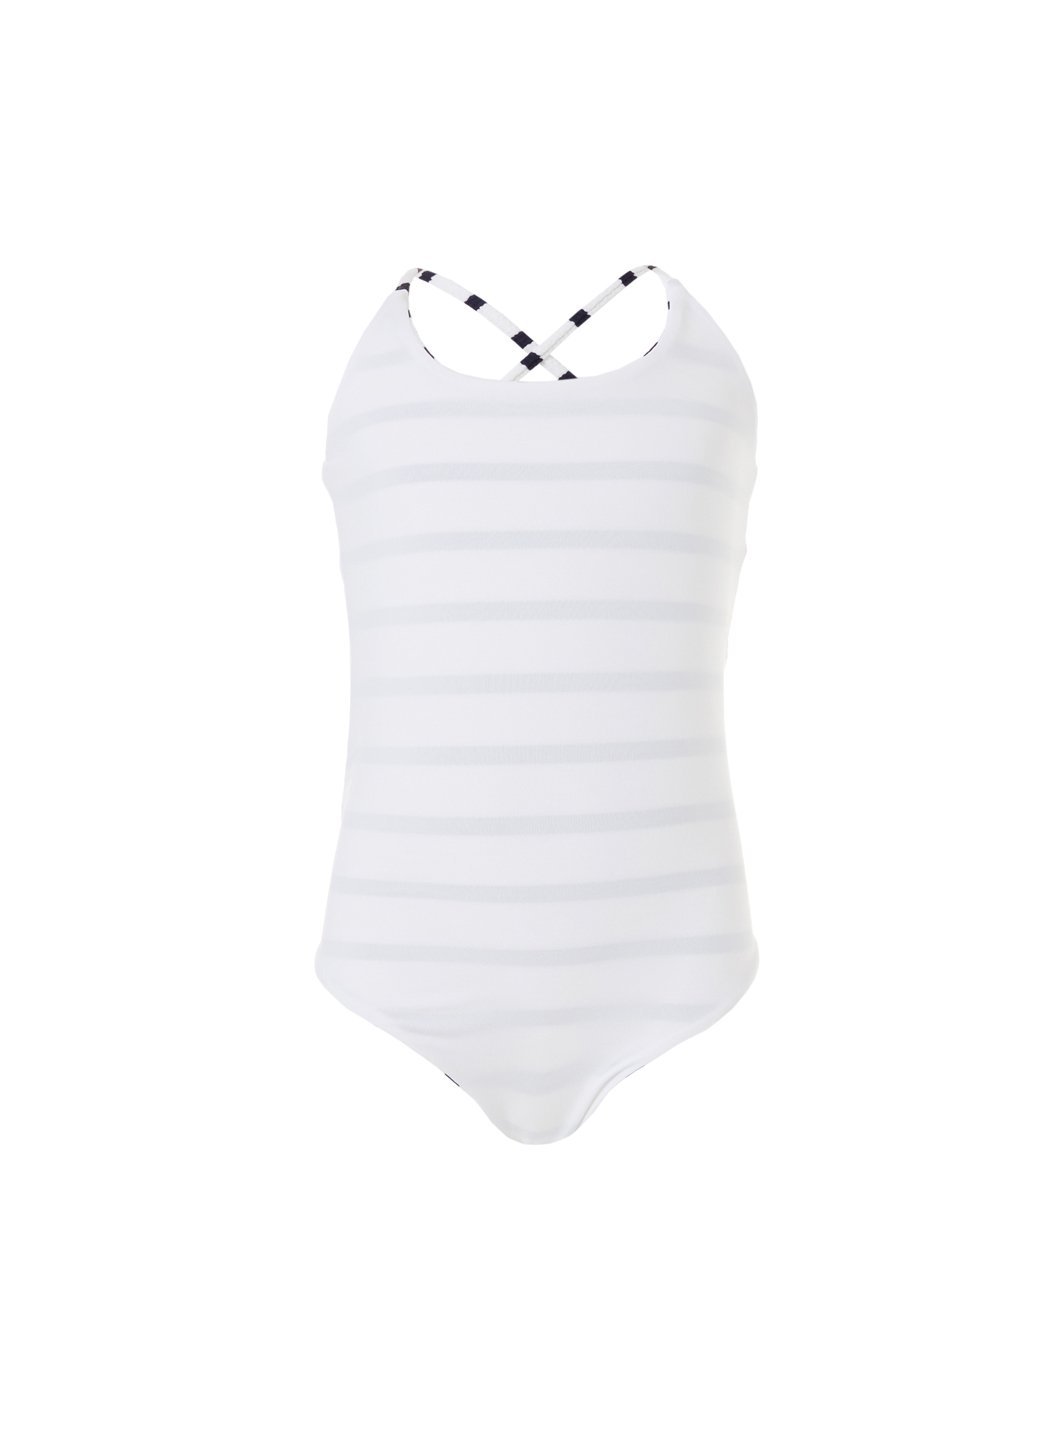 baby vicky marine white cross back onepiece swimsuit 2019 2